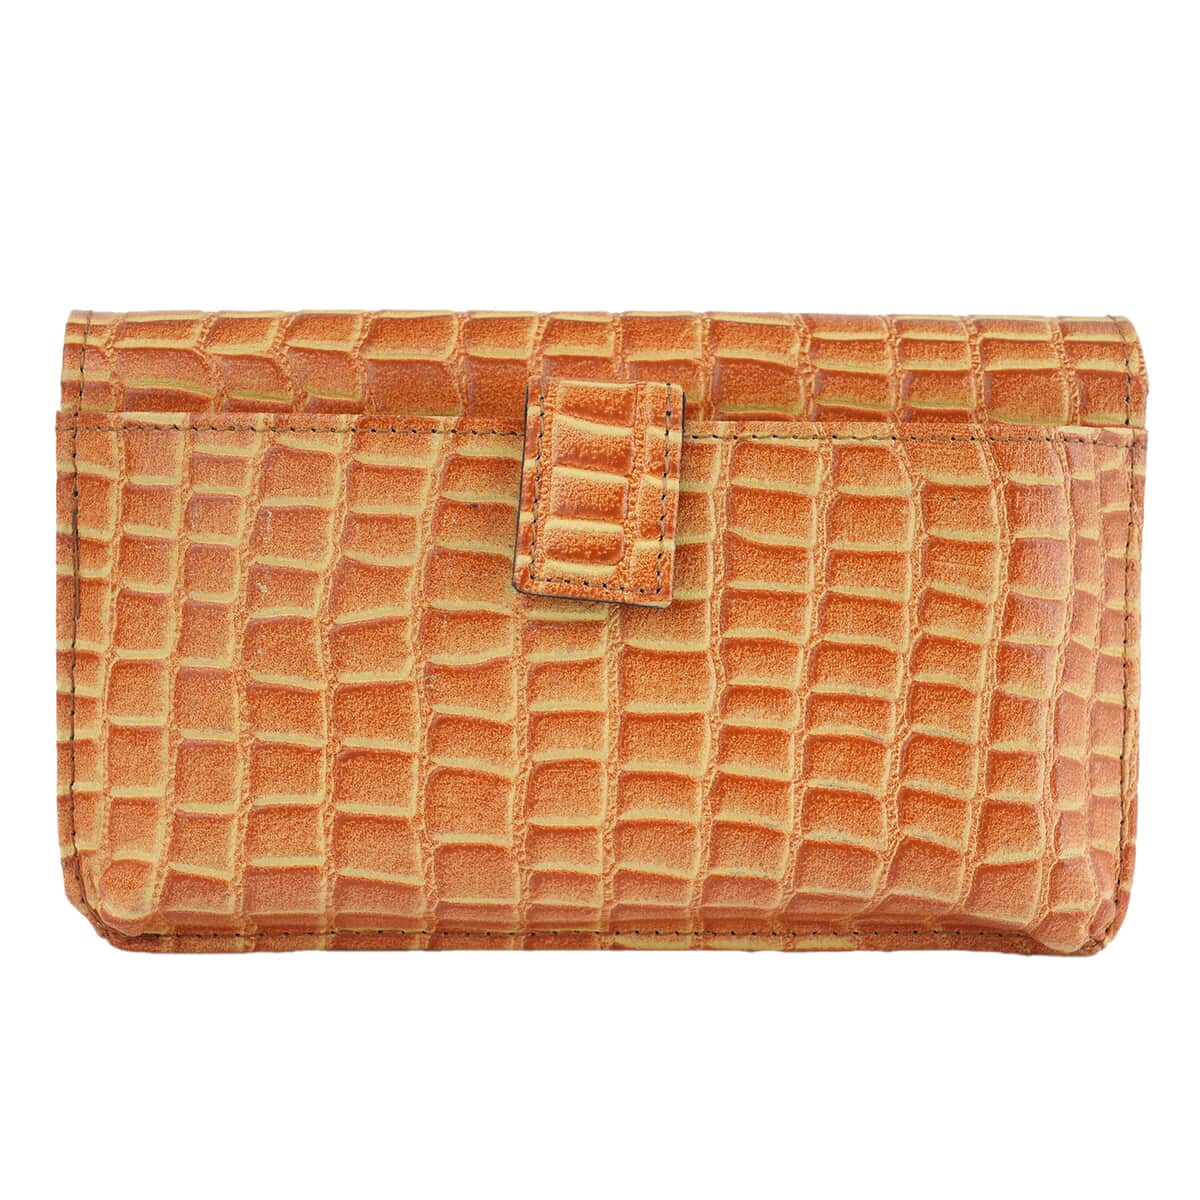 Hong Kong Closeout Orange Genuine Leather Croco Embossed RFID Mobile Case Crossbody Bag with Detachable Shoulder Strap image number 2